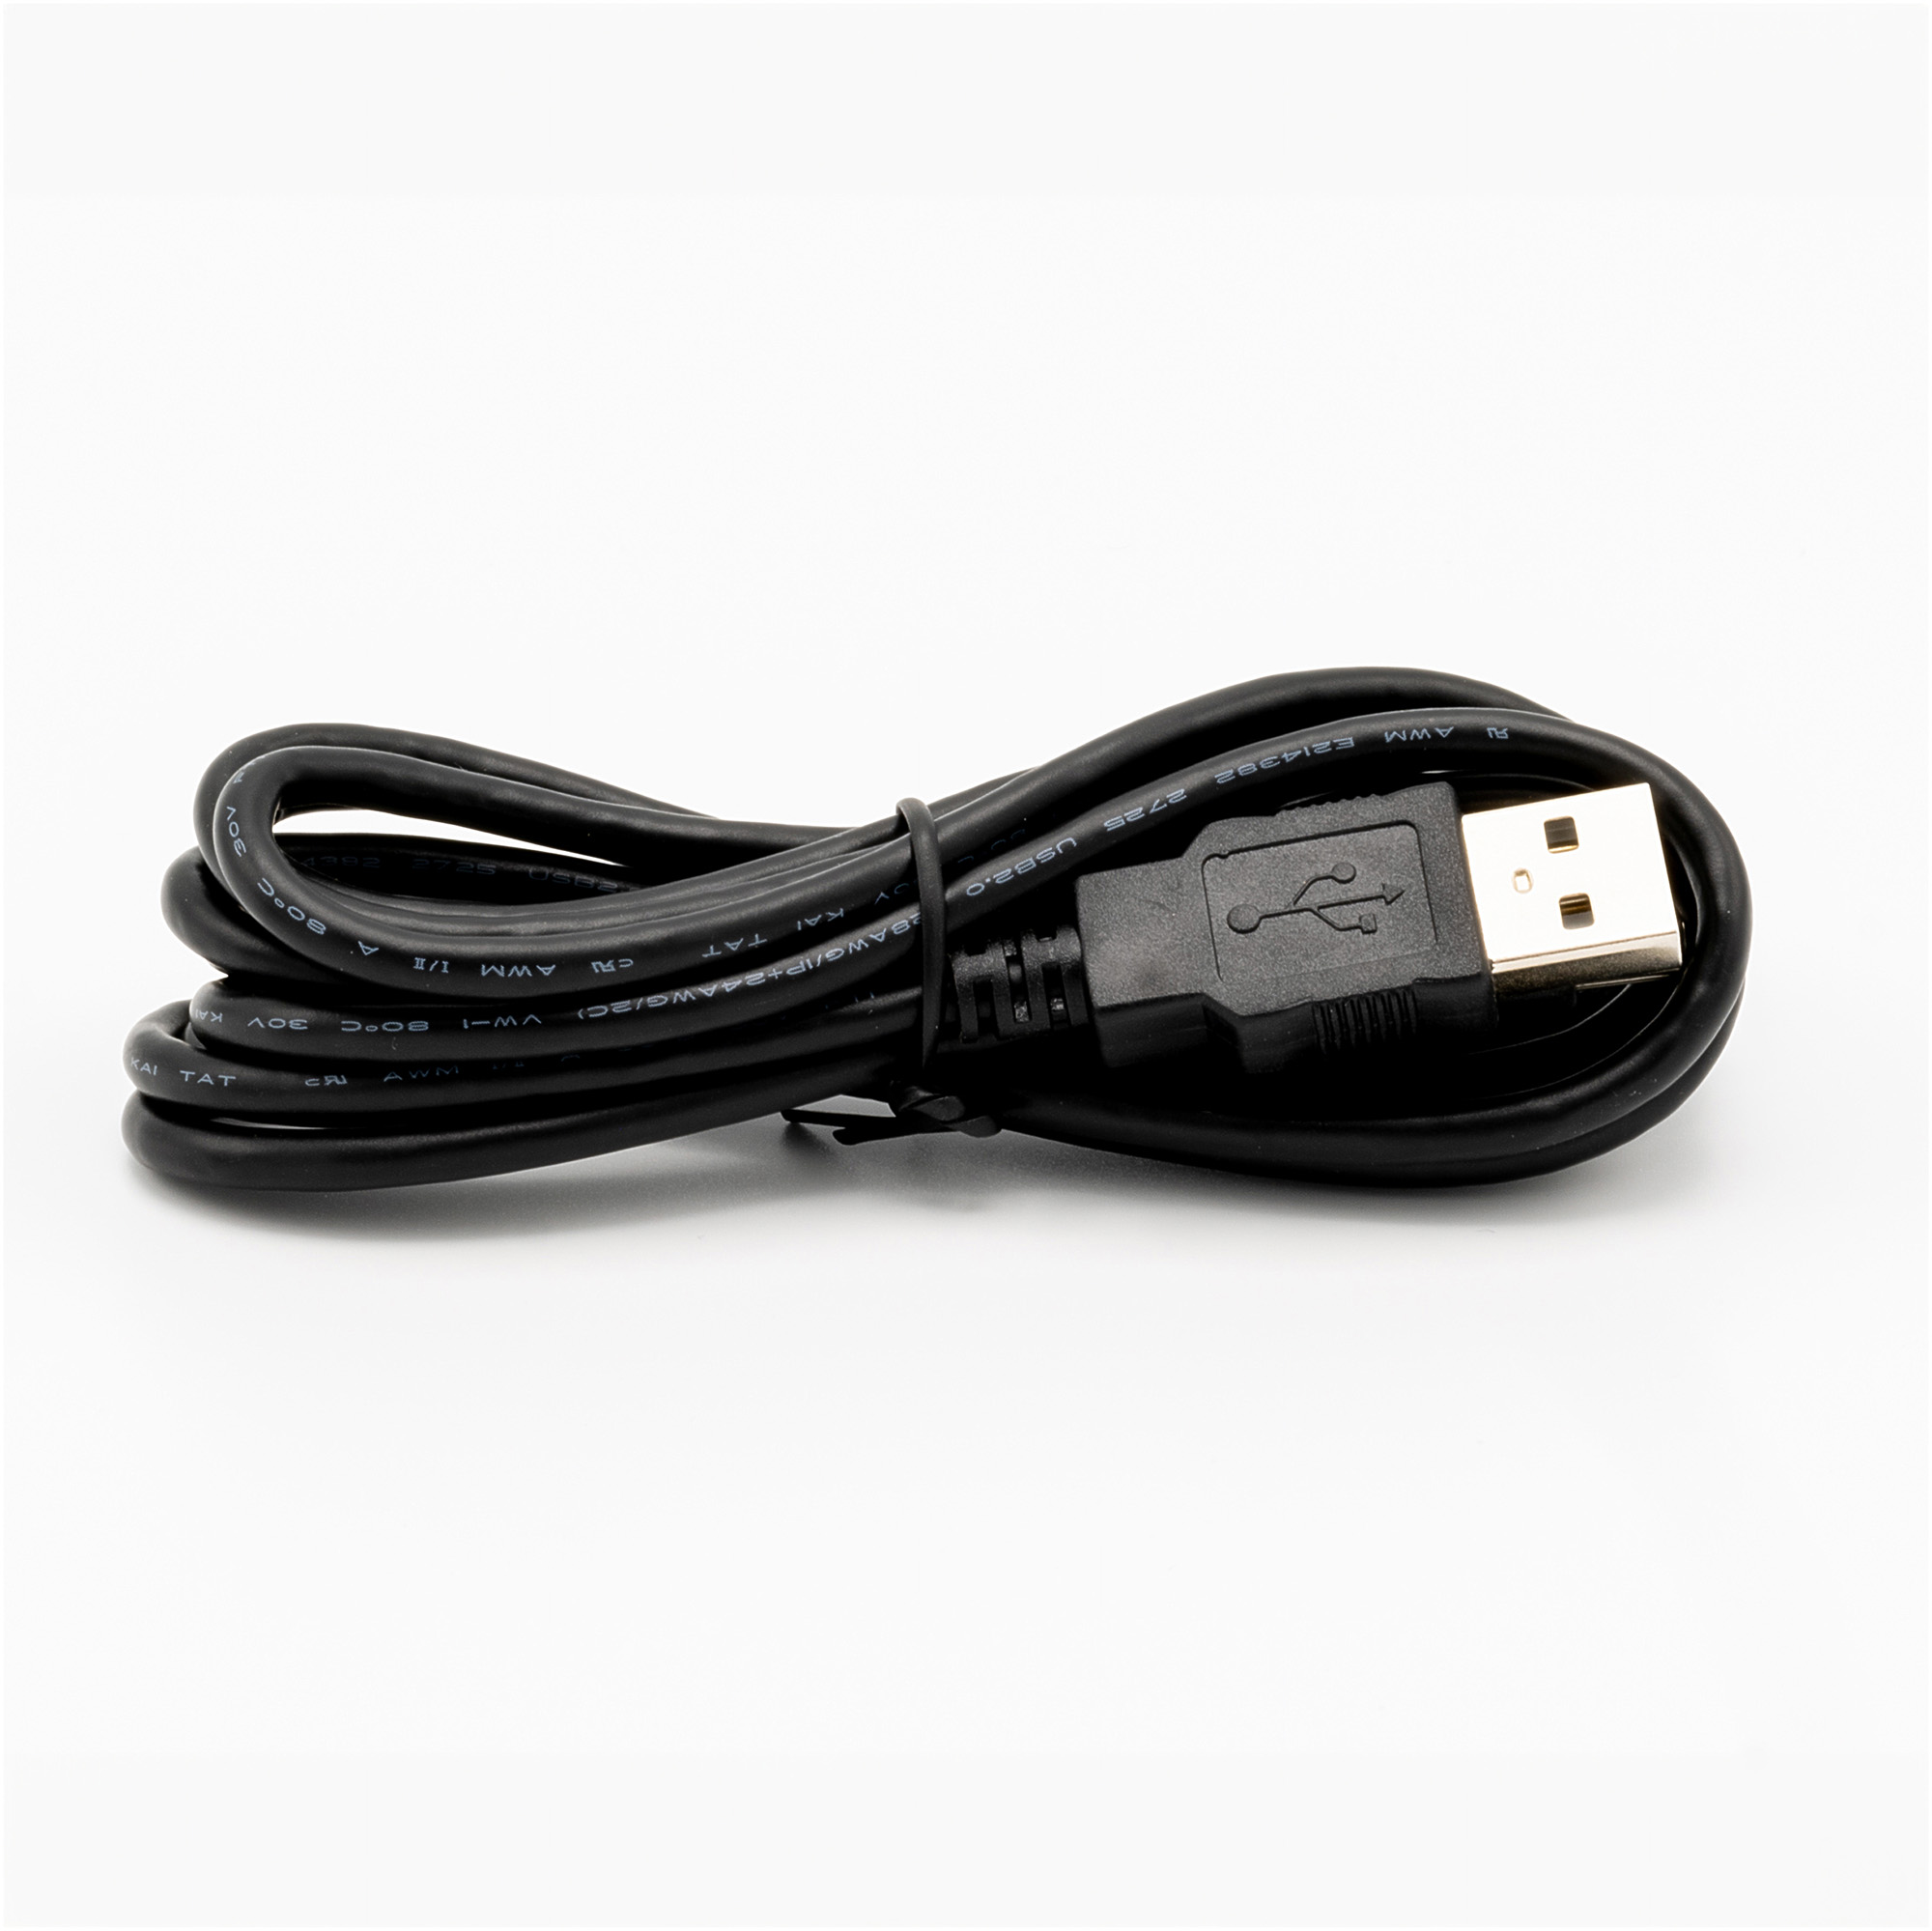 UH-CLAVE-A05 United Headsets charging cable for the Clave series of approx. 90 cm long with a USB-A connection for connection to a PC and a USB-C connection for connection to the headset.